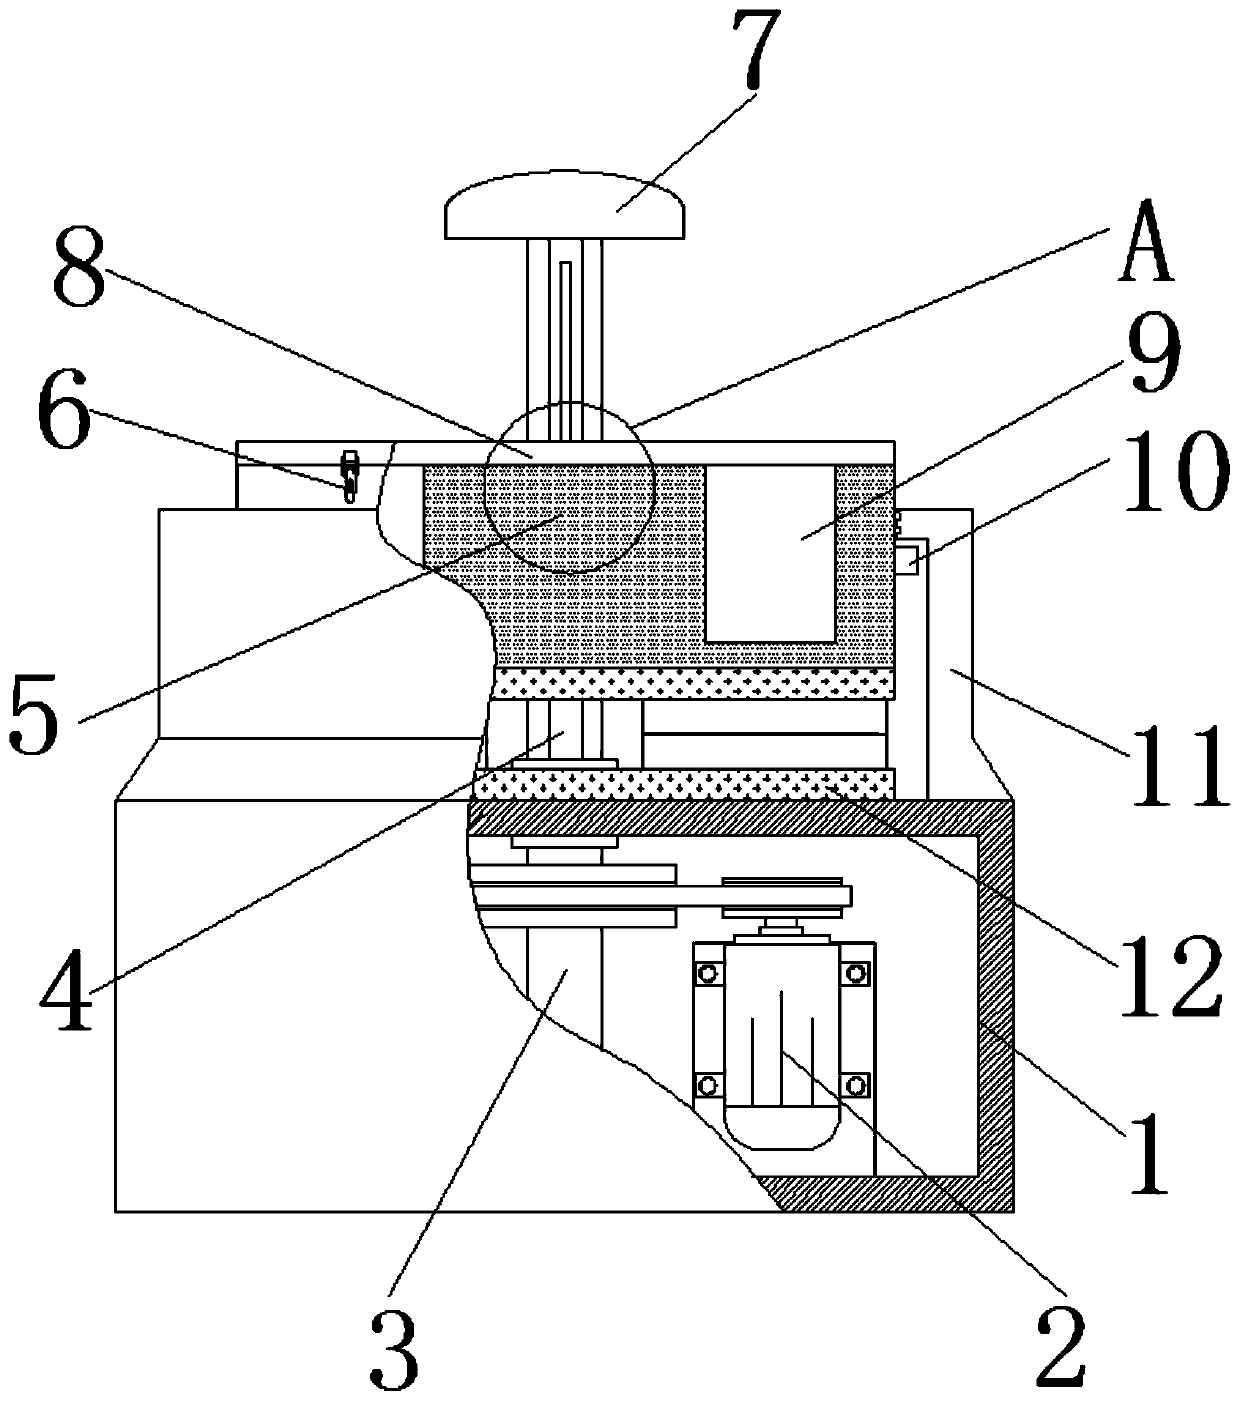 Novel shaking and vibrating device for cosmetic processing